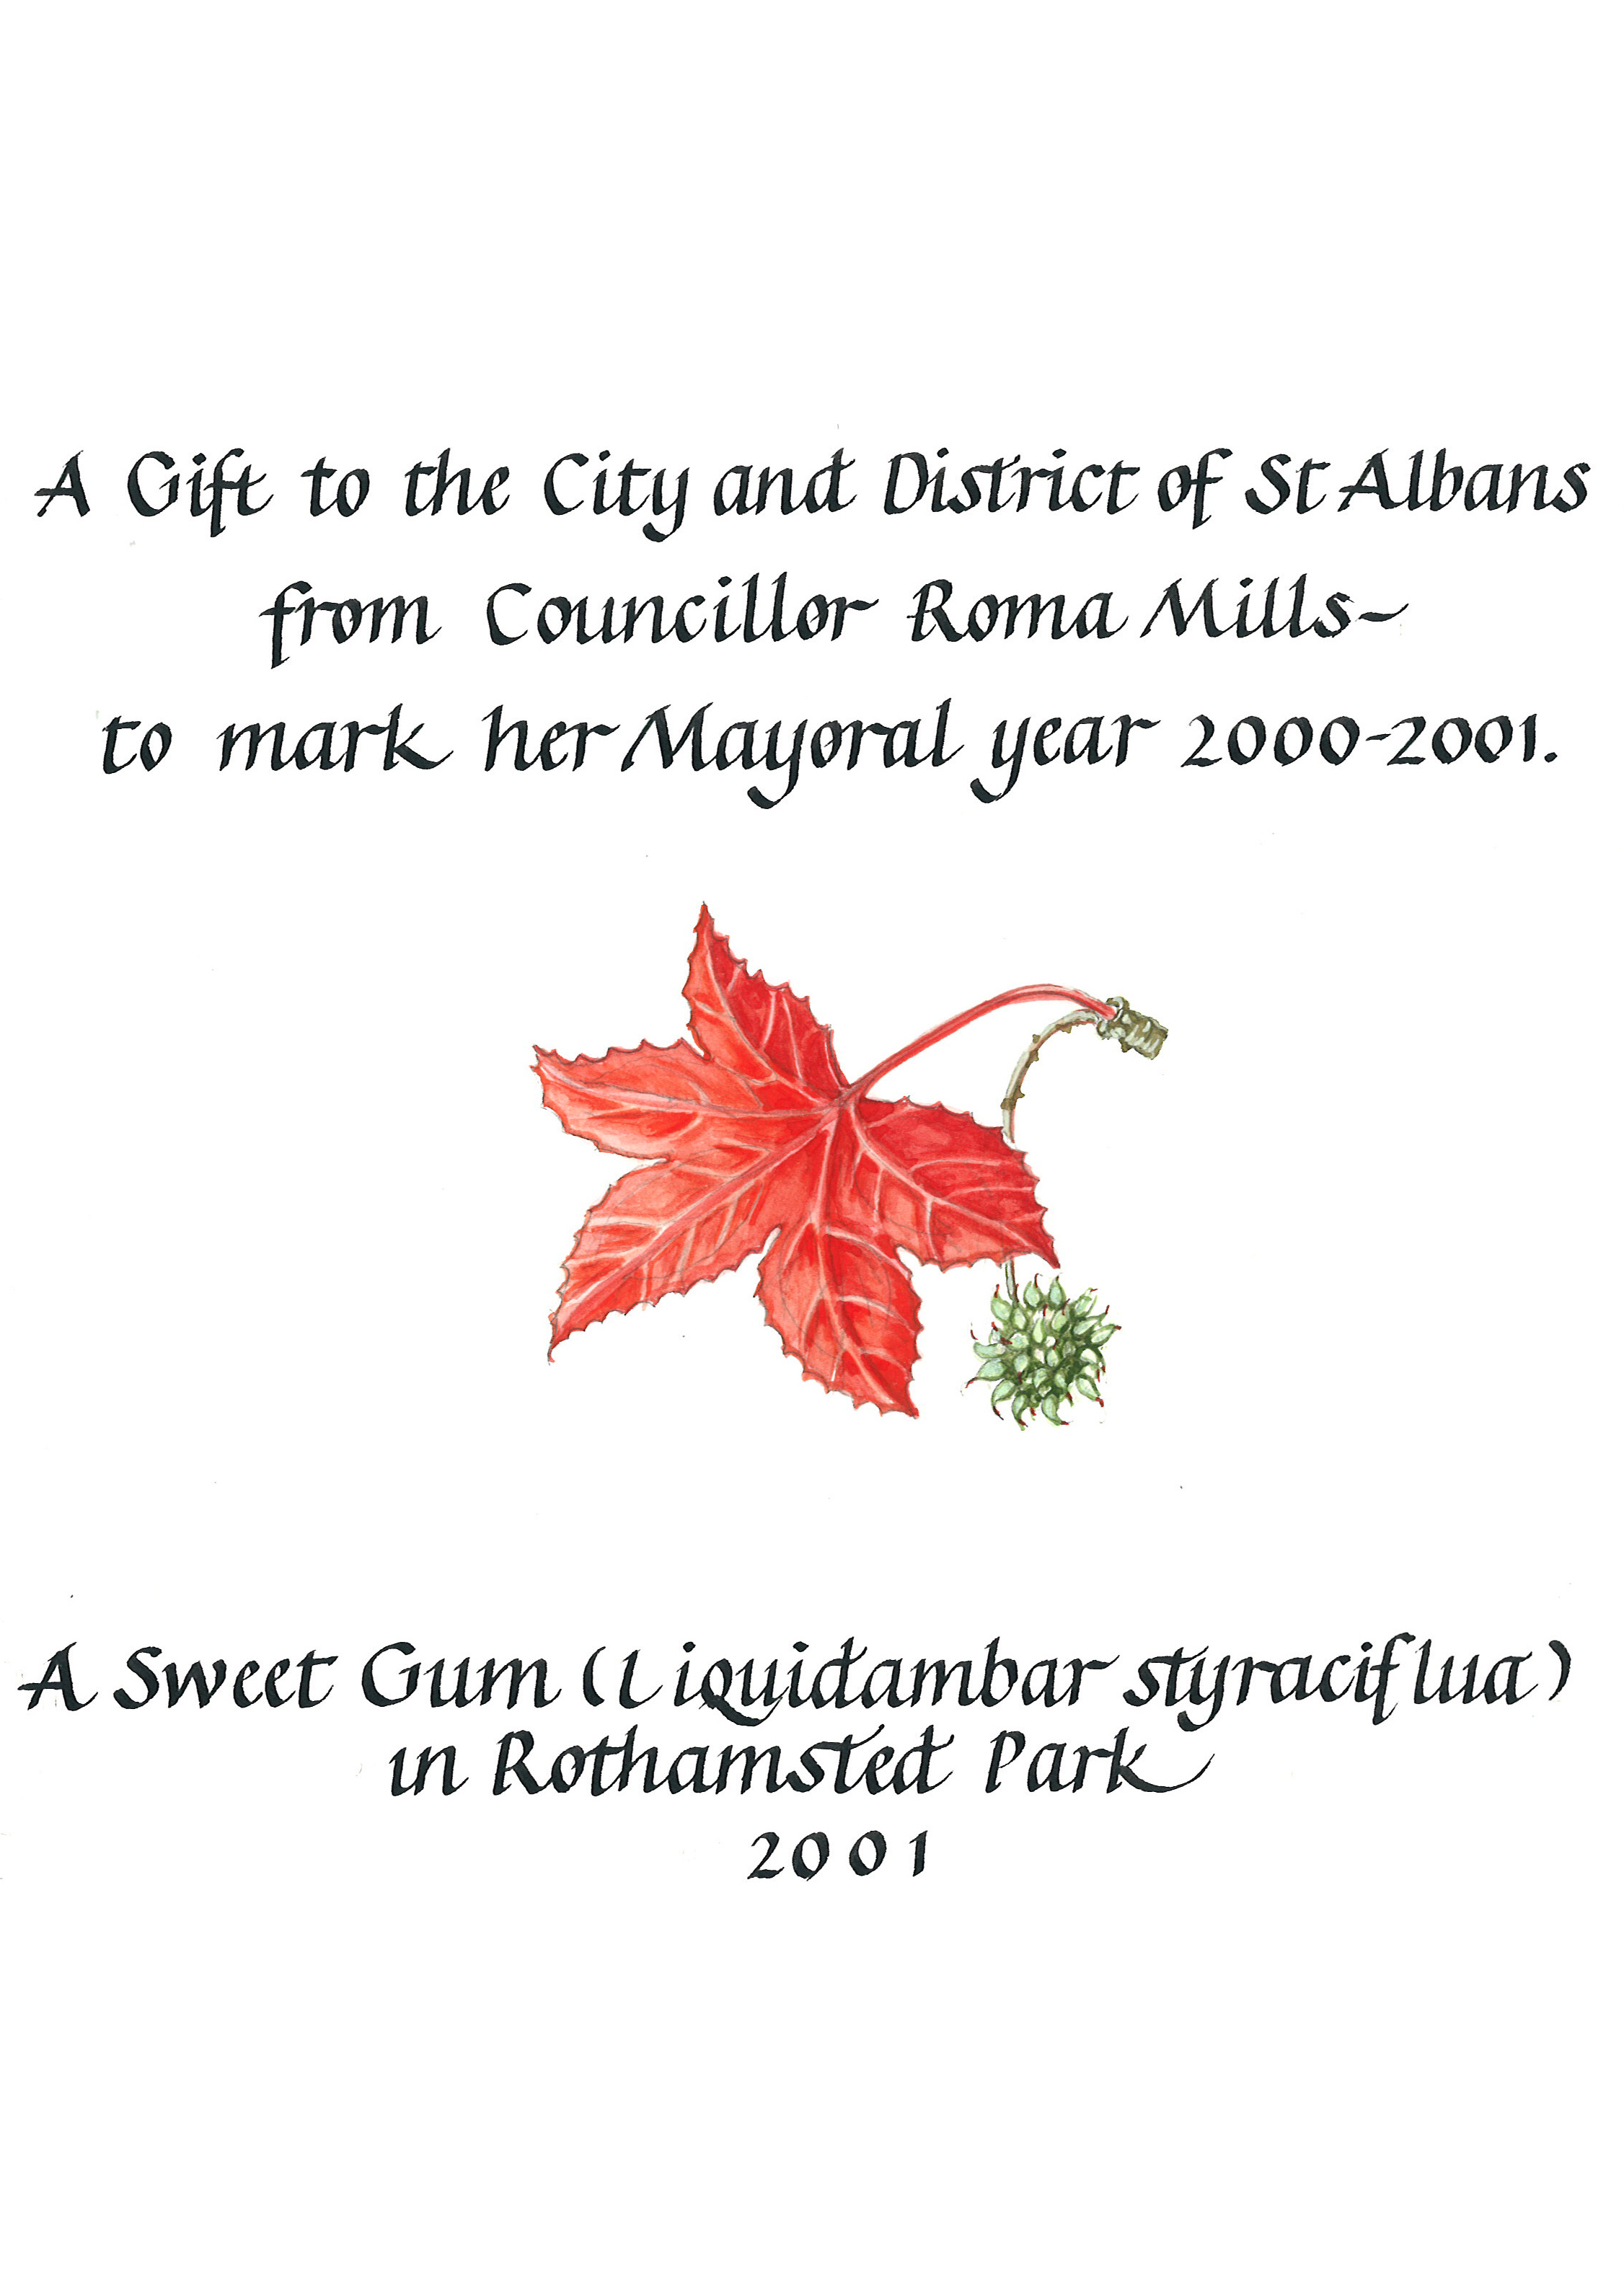 Cllr Roma Mills for her mayoral year 2000-1 - Rothamstead Park webpage 100